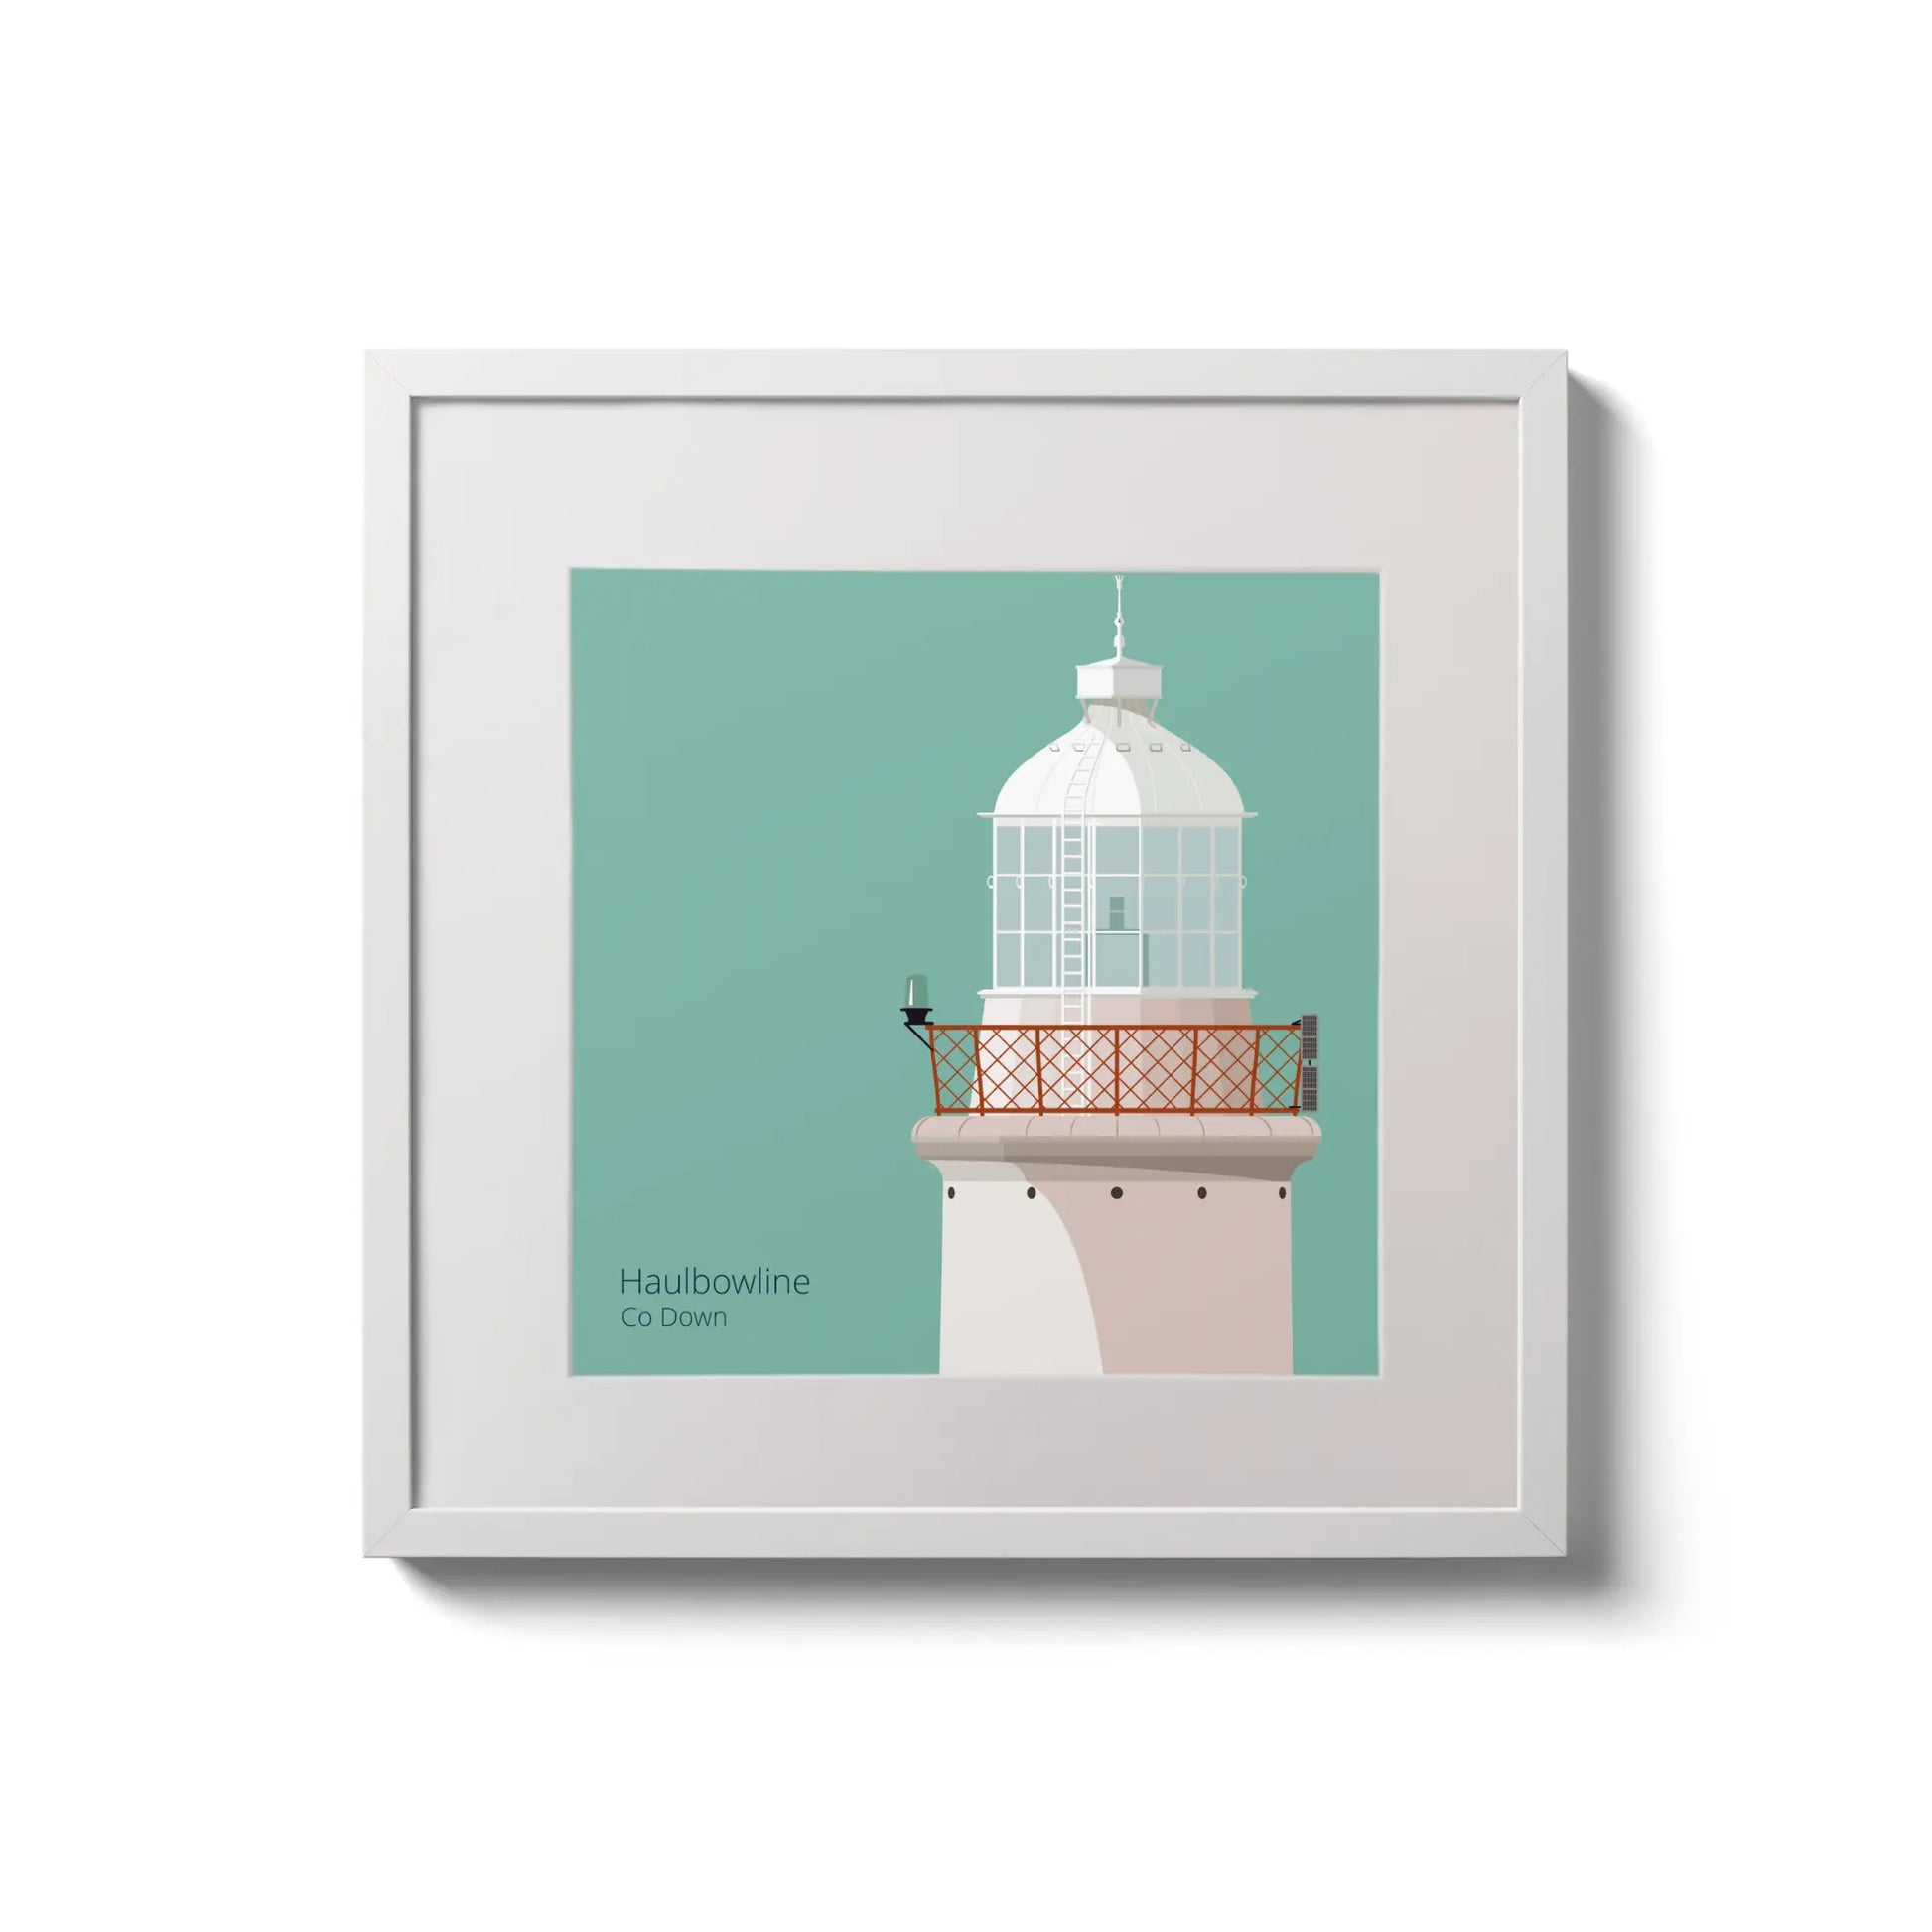 Illustration of Haulbowline lighthouse on an ocean green background,  in a white square frame measuring 20x20cm.